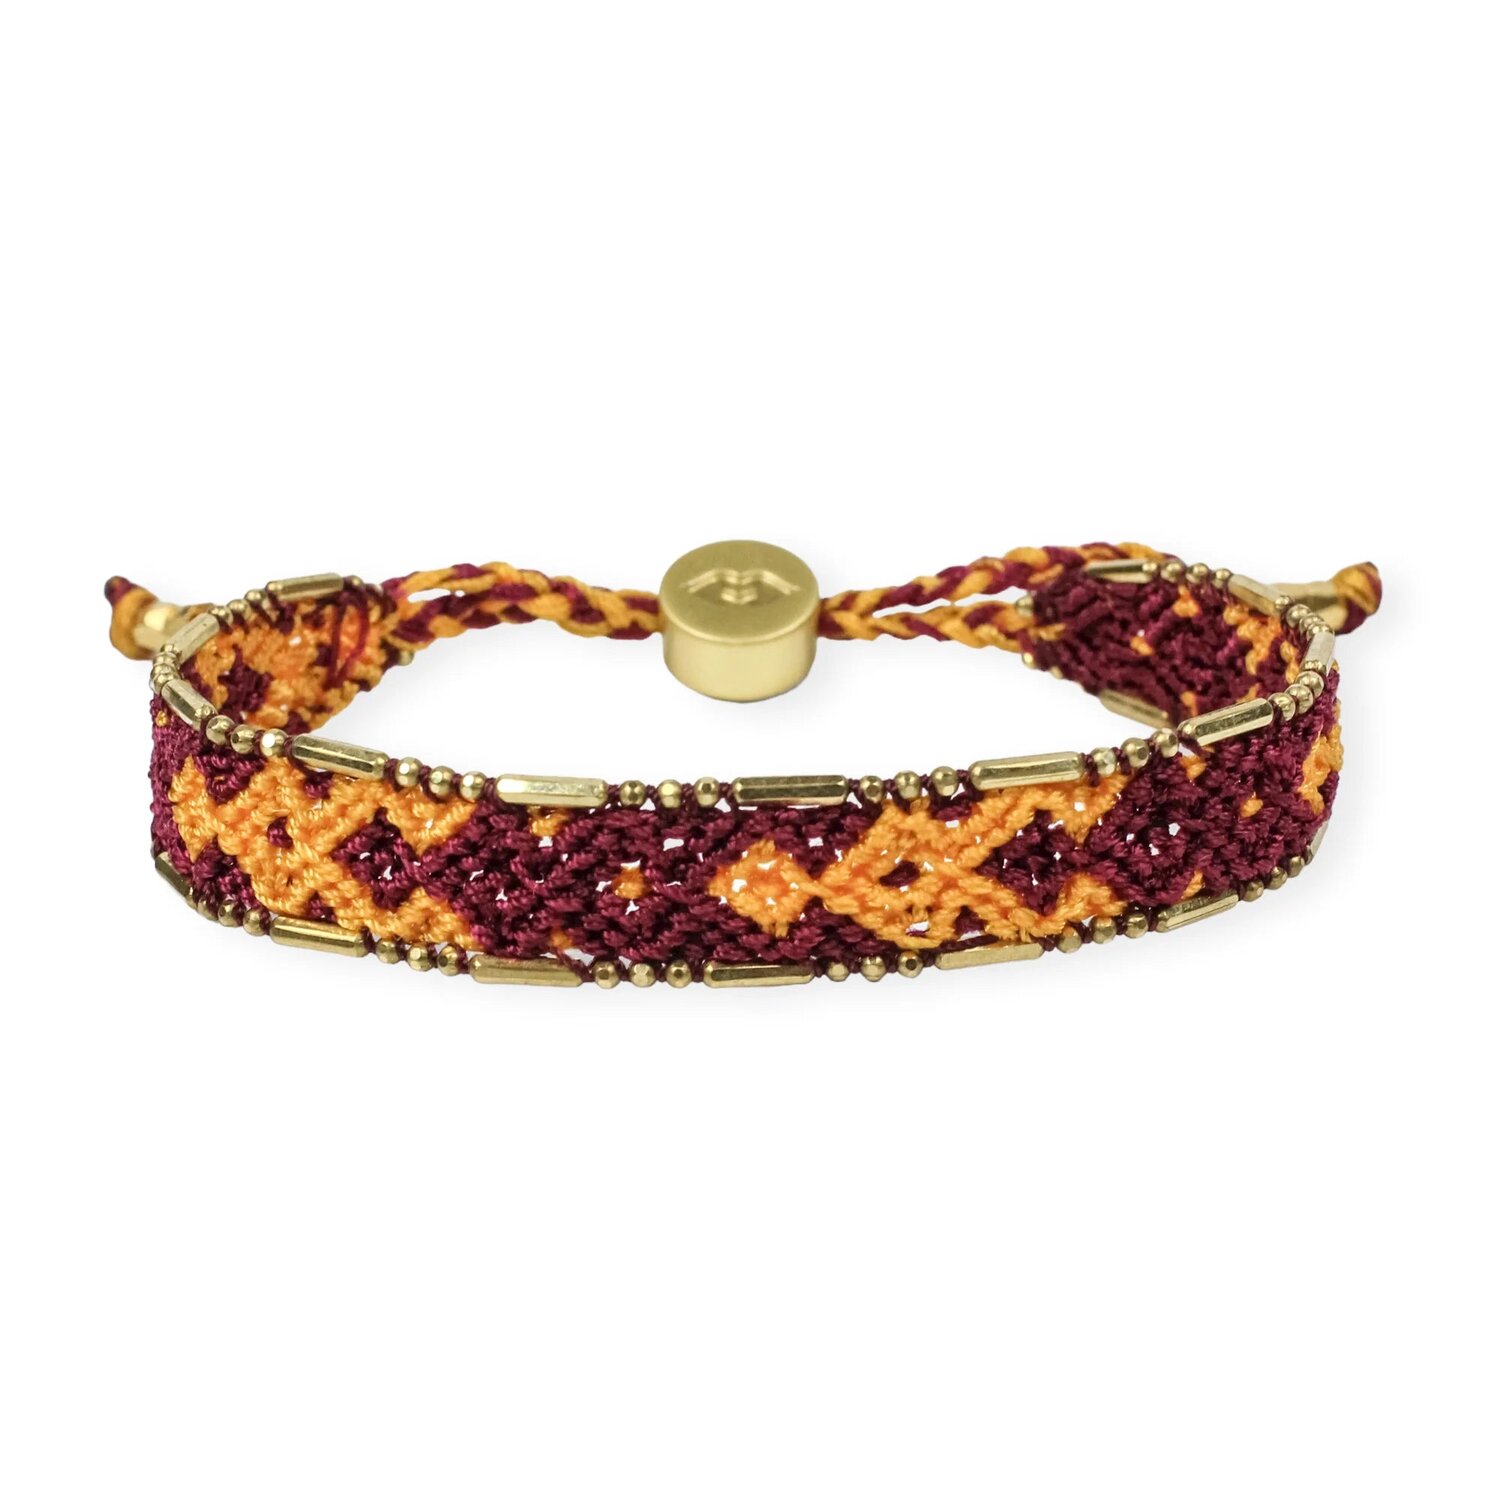 Bali Friendship Bracelet in Cardinal and Gold Yellow by the Love Is ...